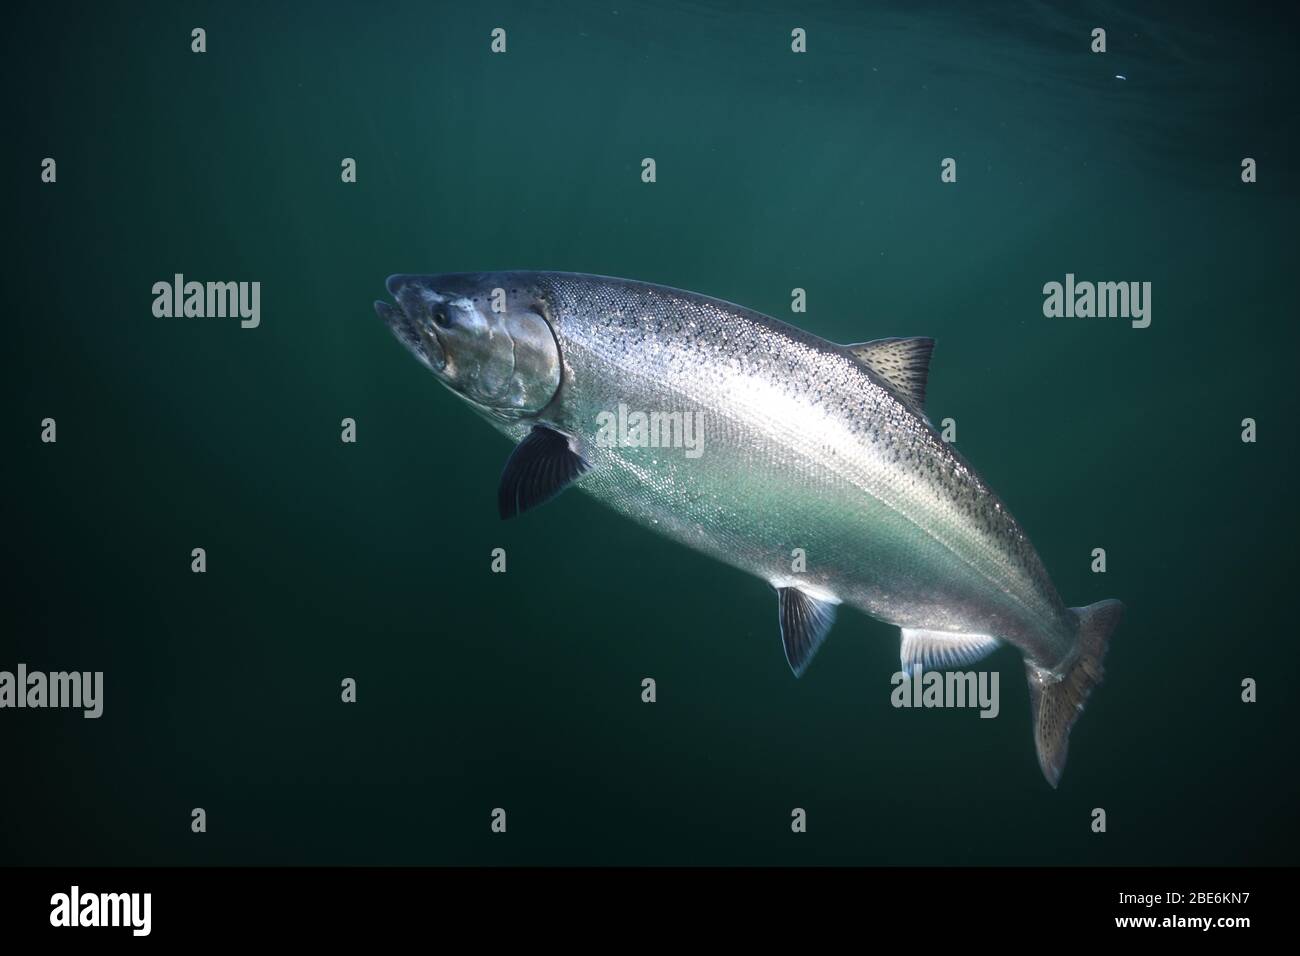 Chinook salmon or King salmon, Oncorhynchus tshawytscha, caught with a fishing lure  swimming in the open ocean or Lake. Stock Photo